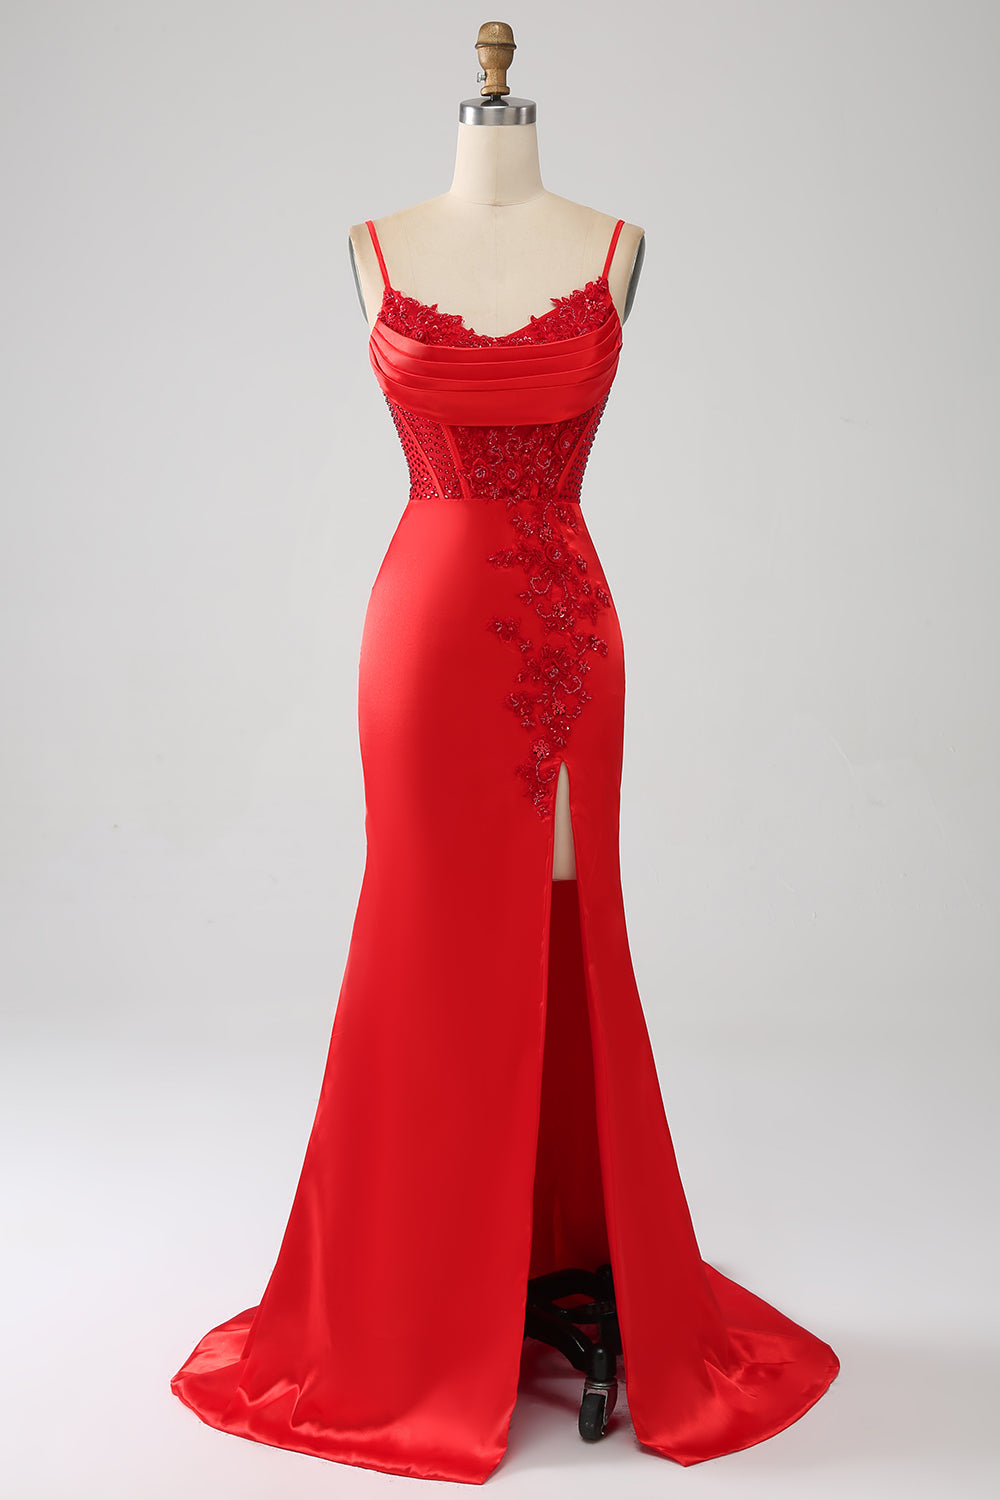 Red Beaded Mermaid Red Corset Prom Dress With High Side Split And Pleats  Customizable For Formal Events And Parties From Shiningirls, $119.6